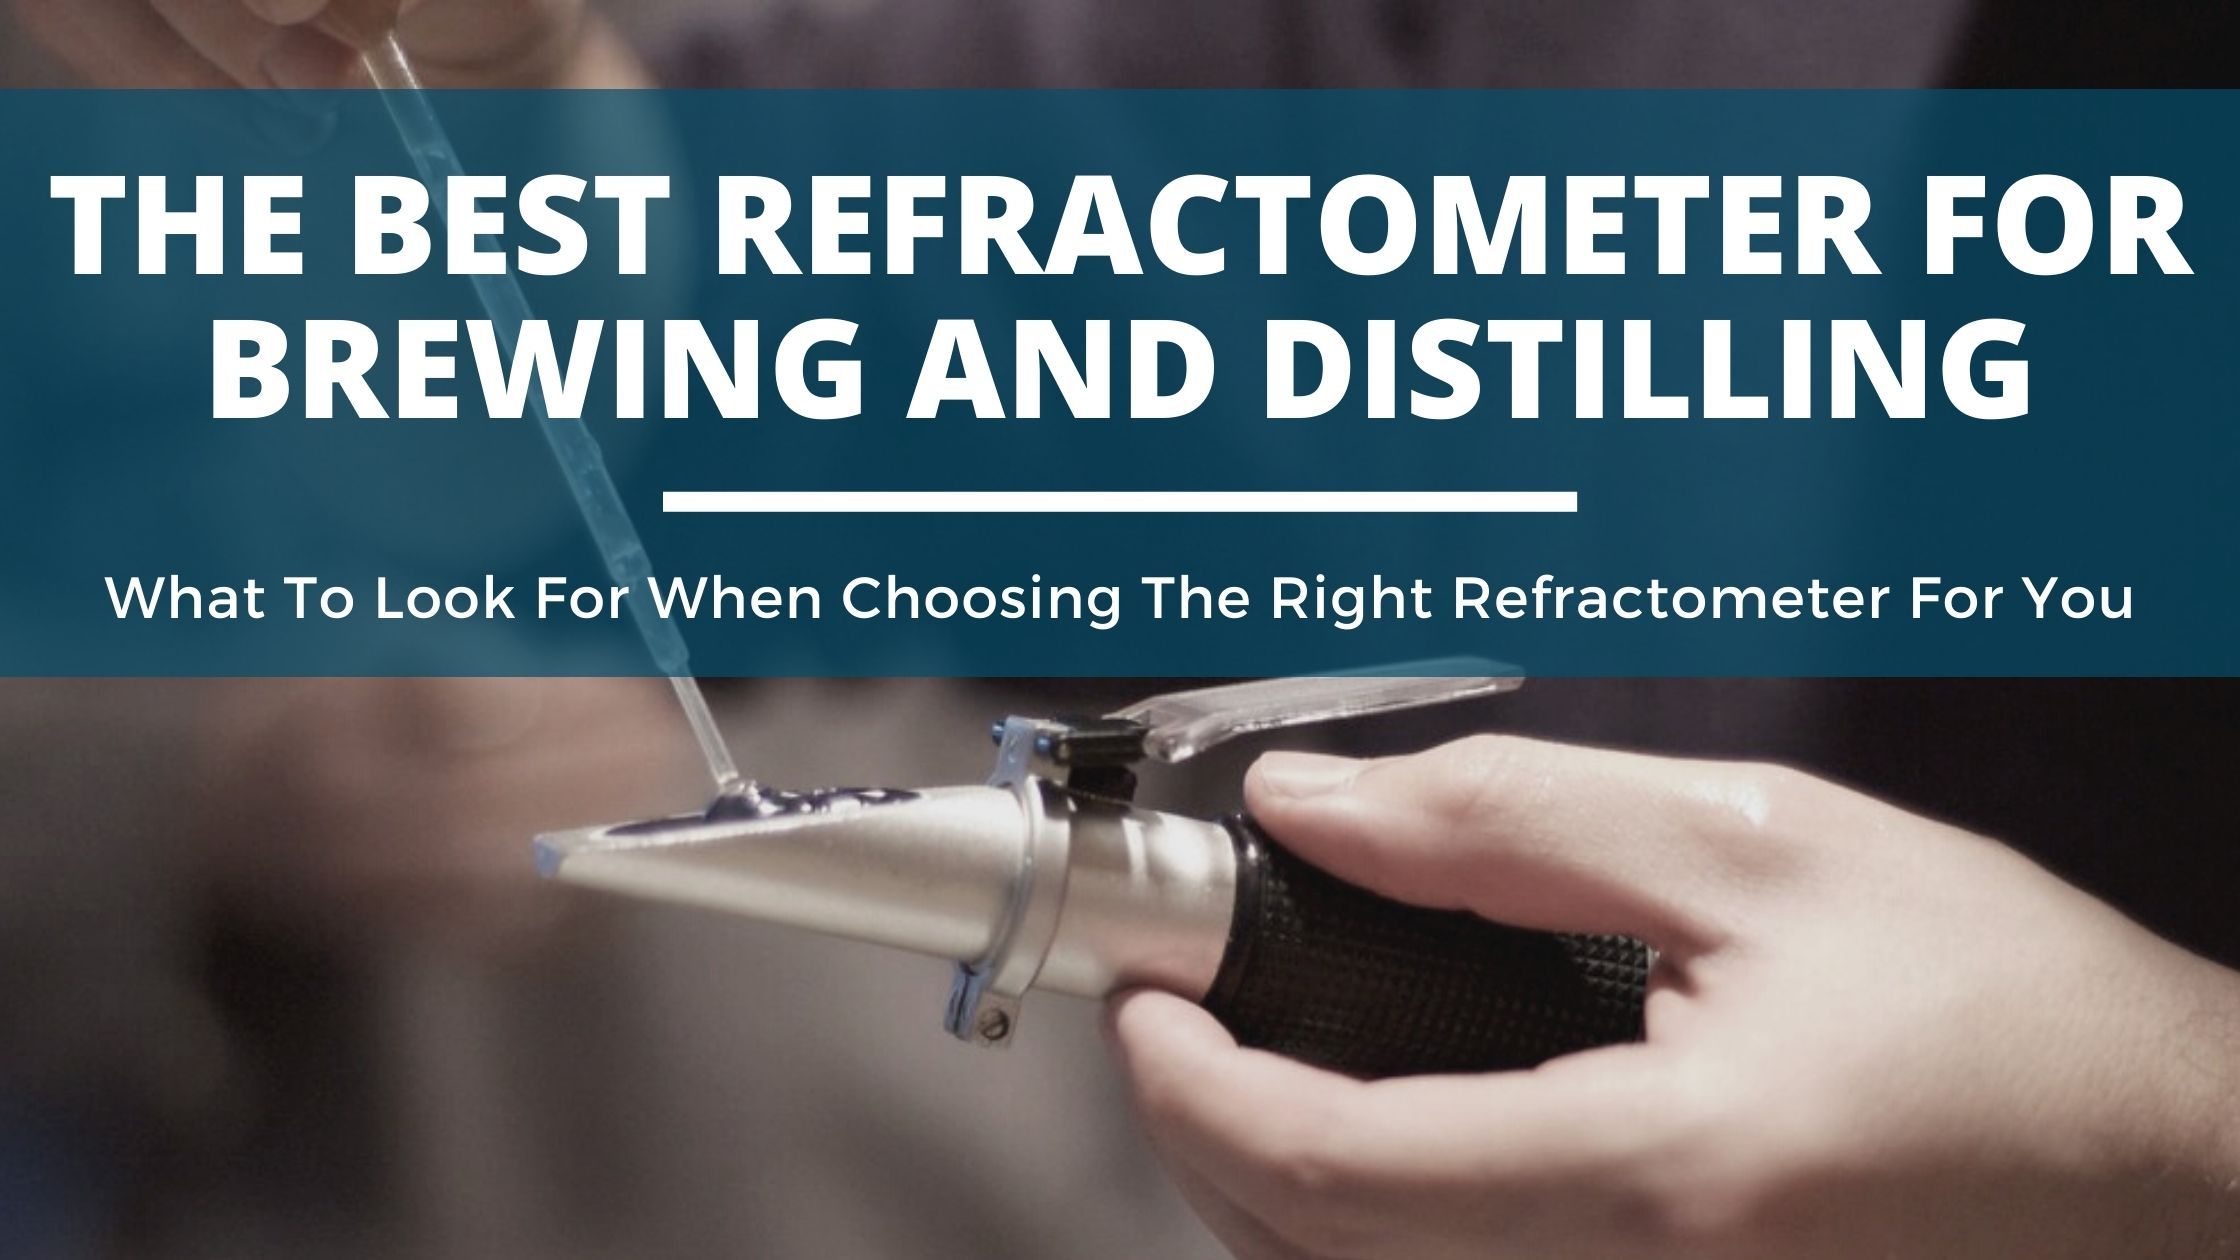 Image of diy distilling the best refractometer for brewing and distilling